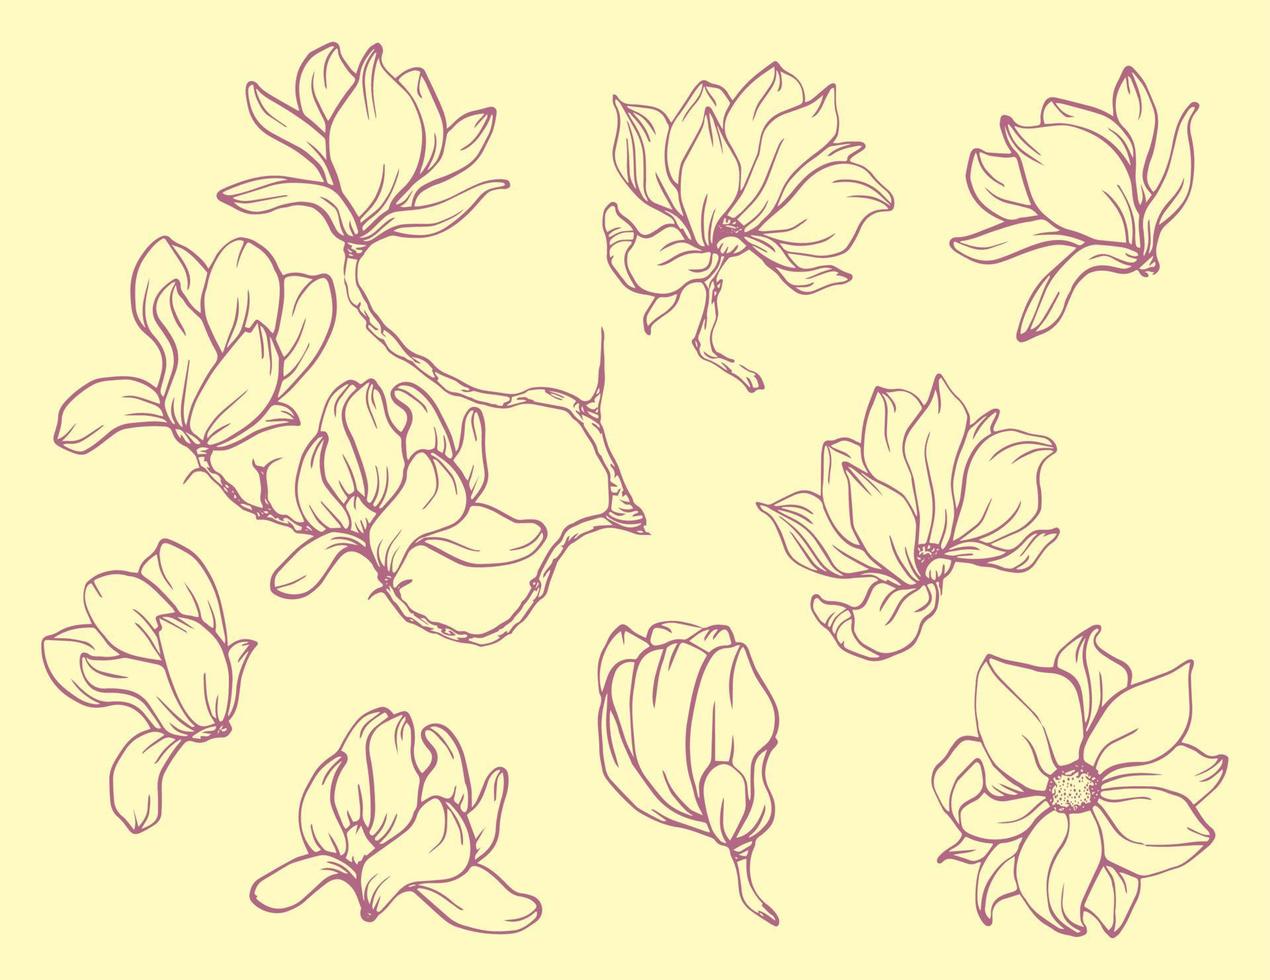 Set of floral elements. Bundle of Linear sketch of Magnolia Flowers. Collection of Hand drawn style vector